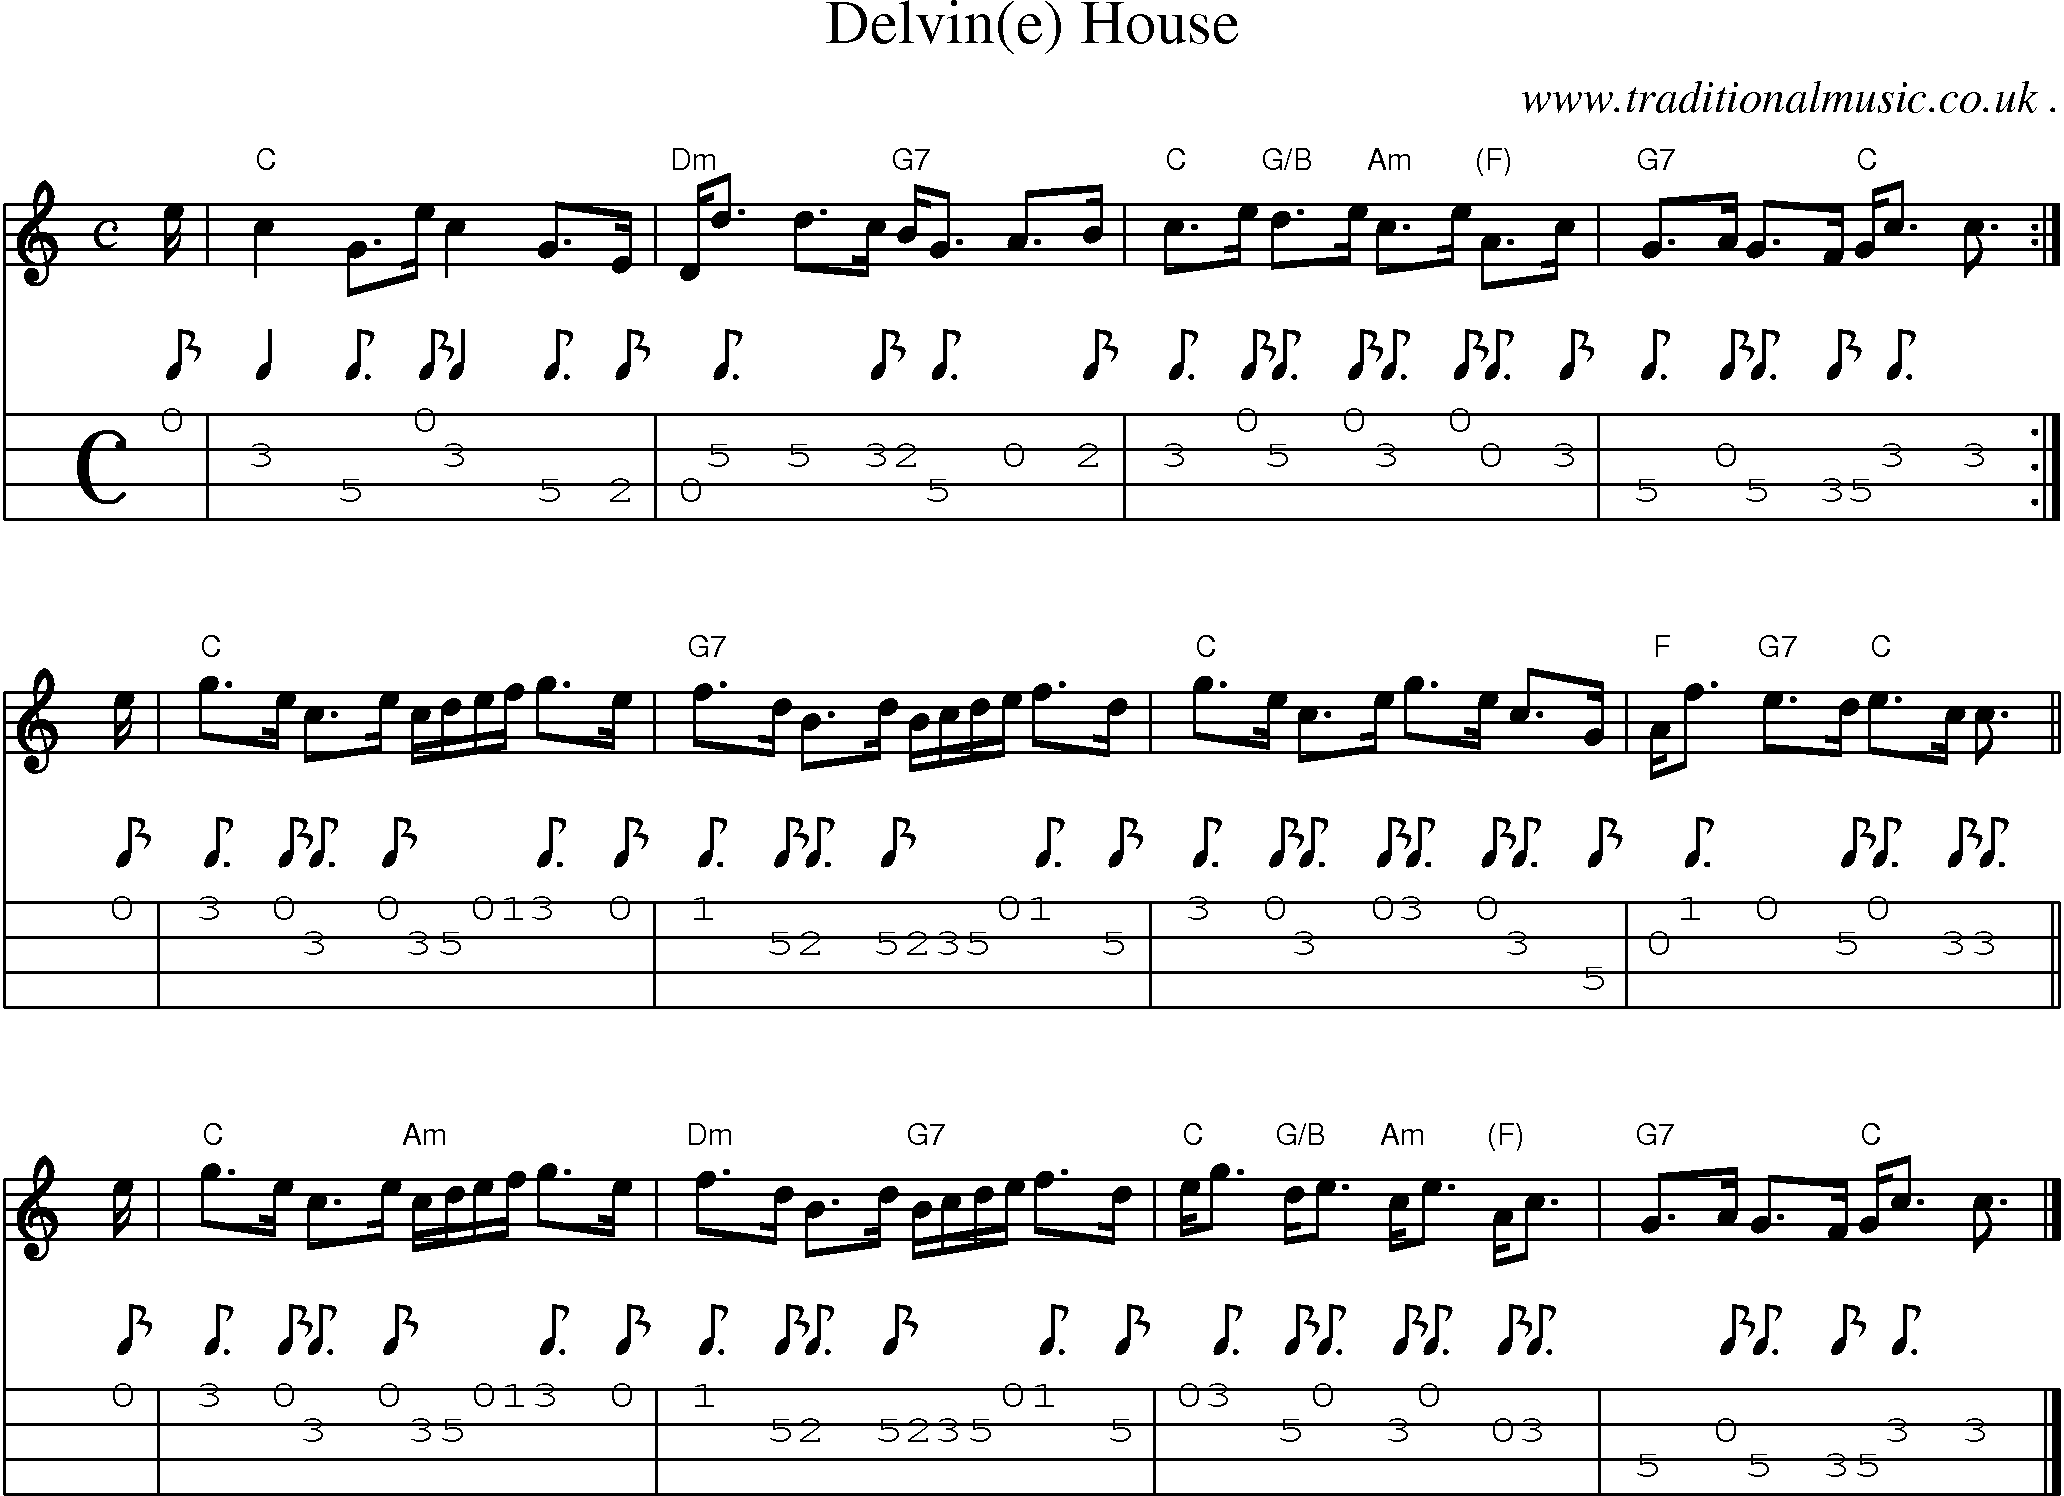 Sheet-music  score, Chords and Mandolin Tabs for Delvine House